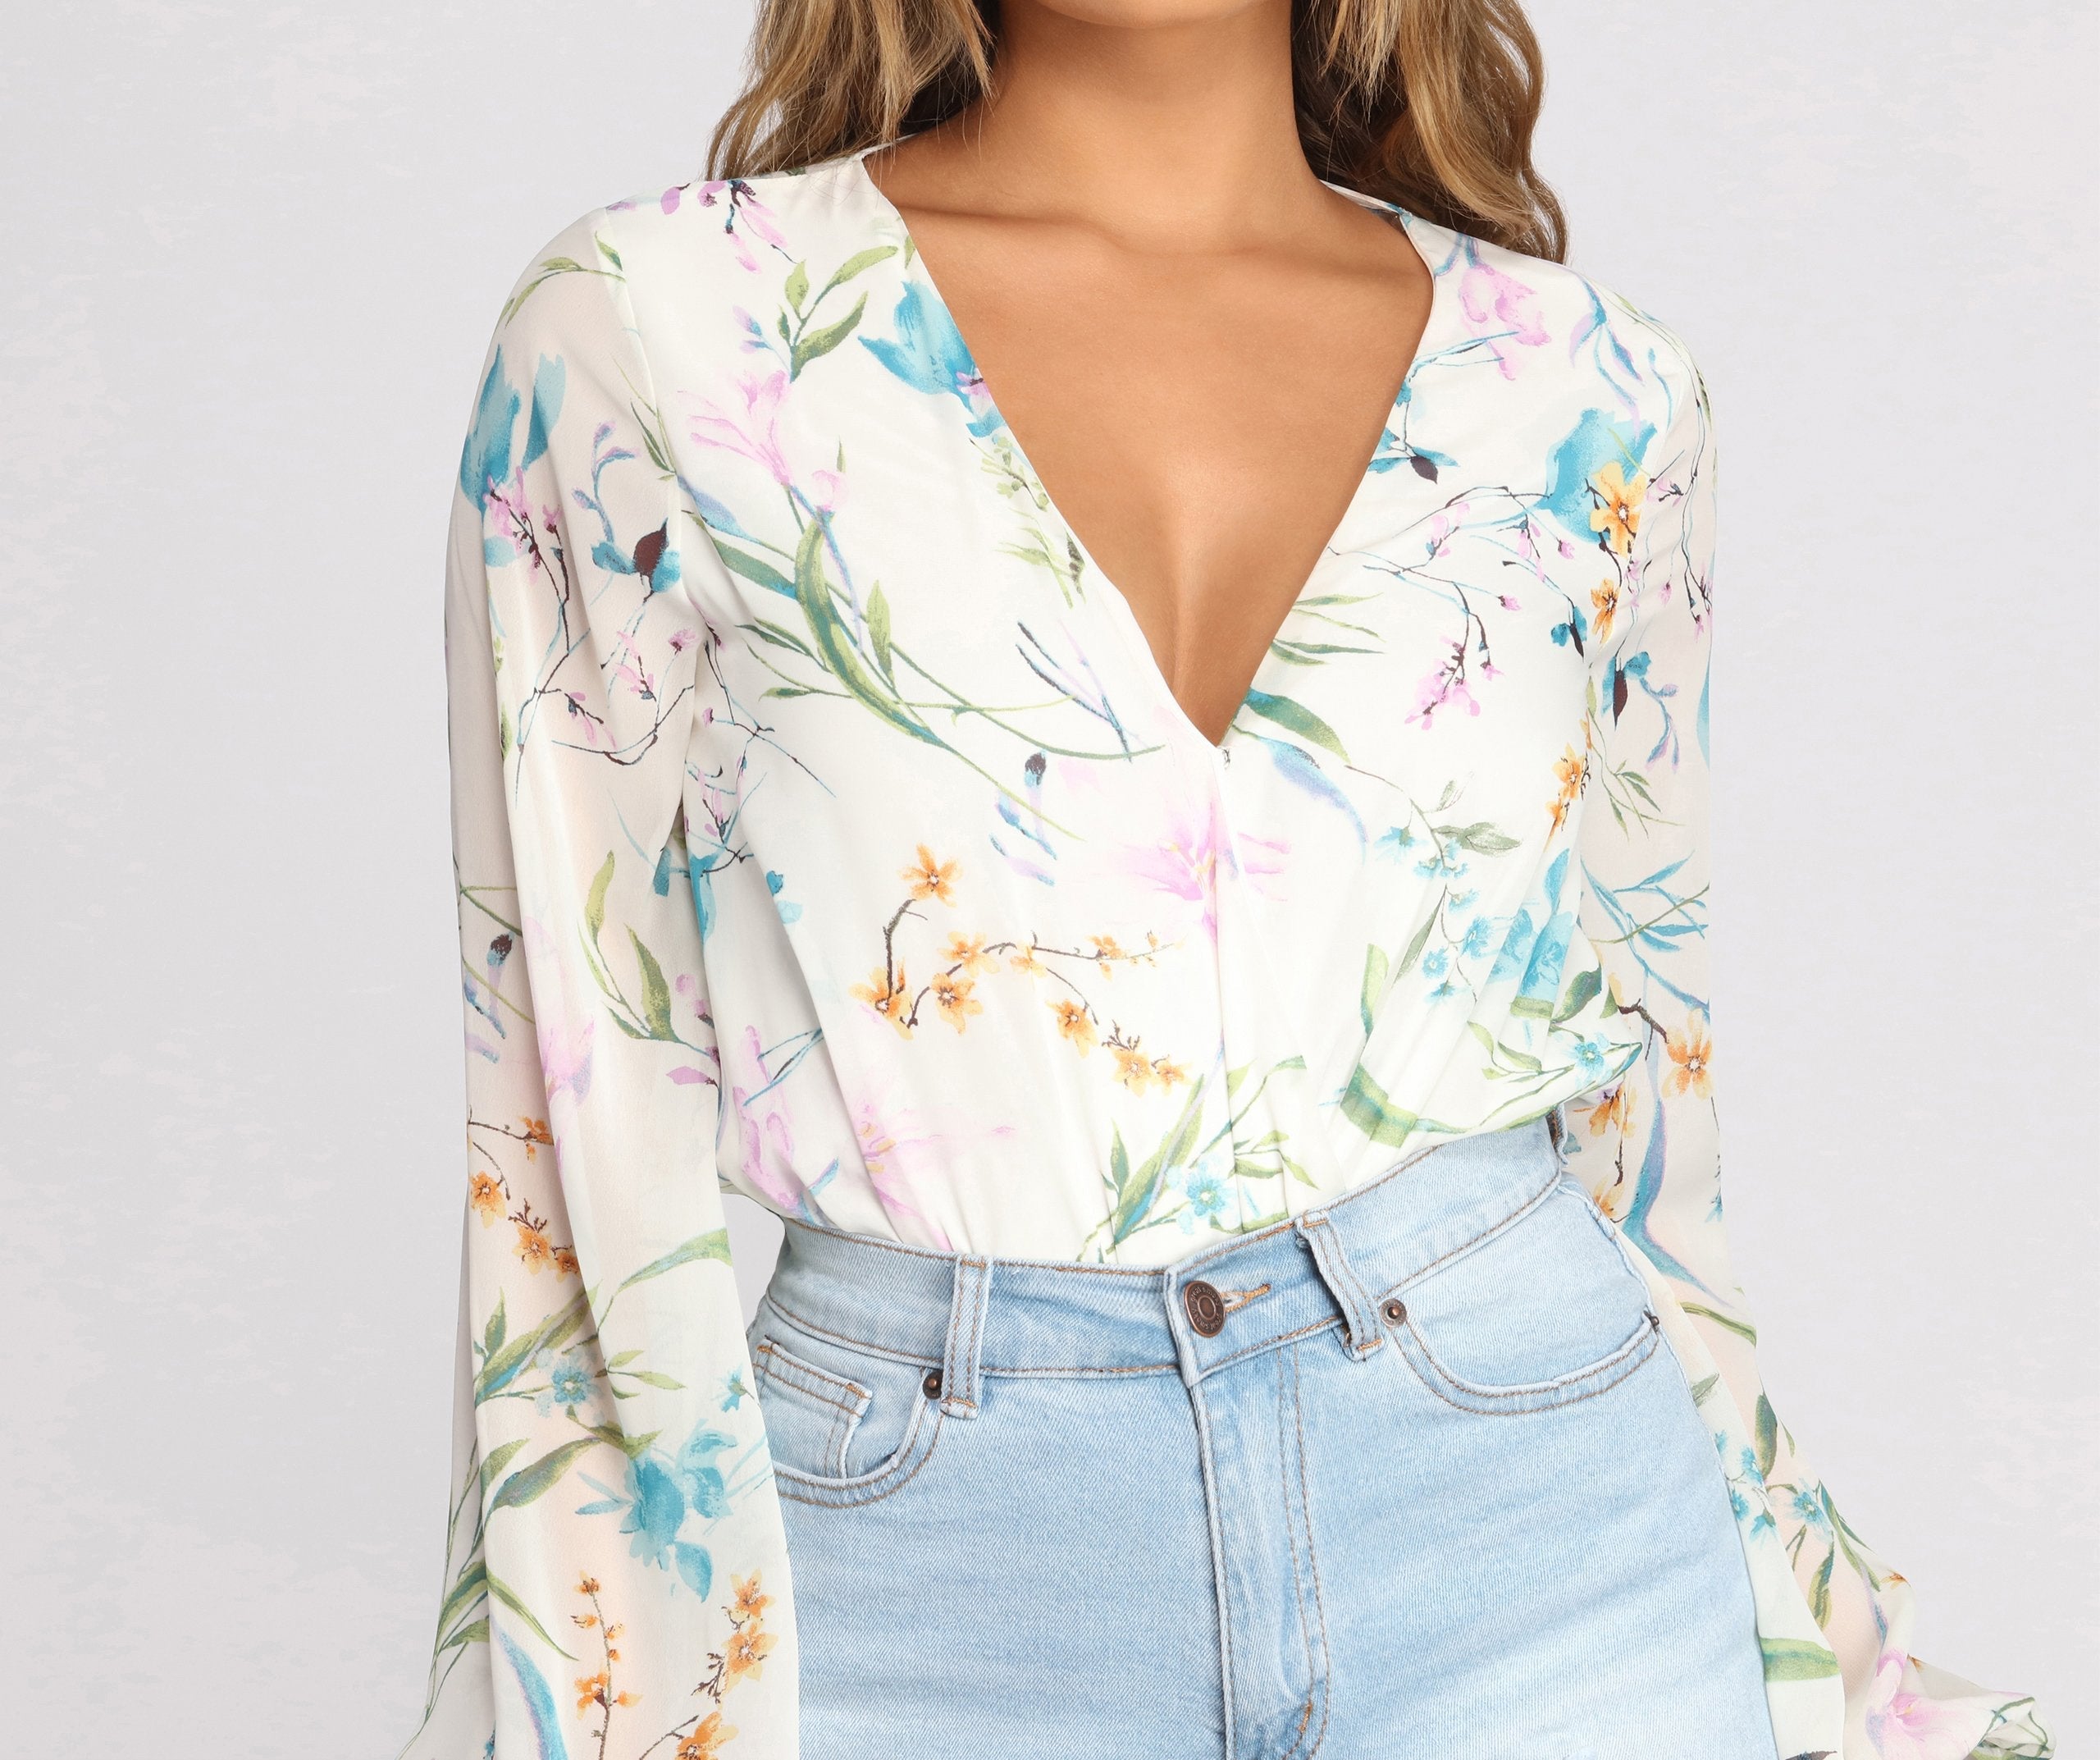 Poised In Petals Floral Chiffon Bodysuit